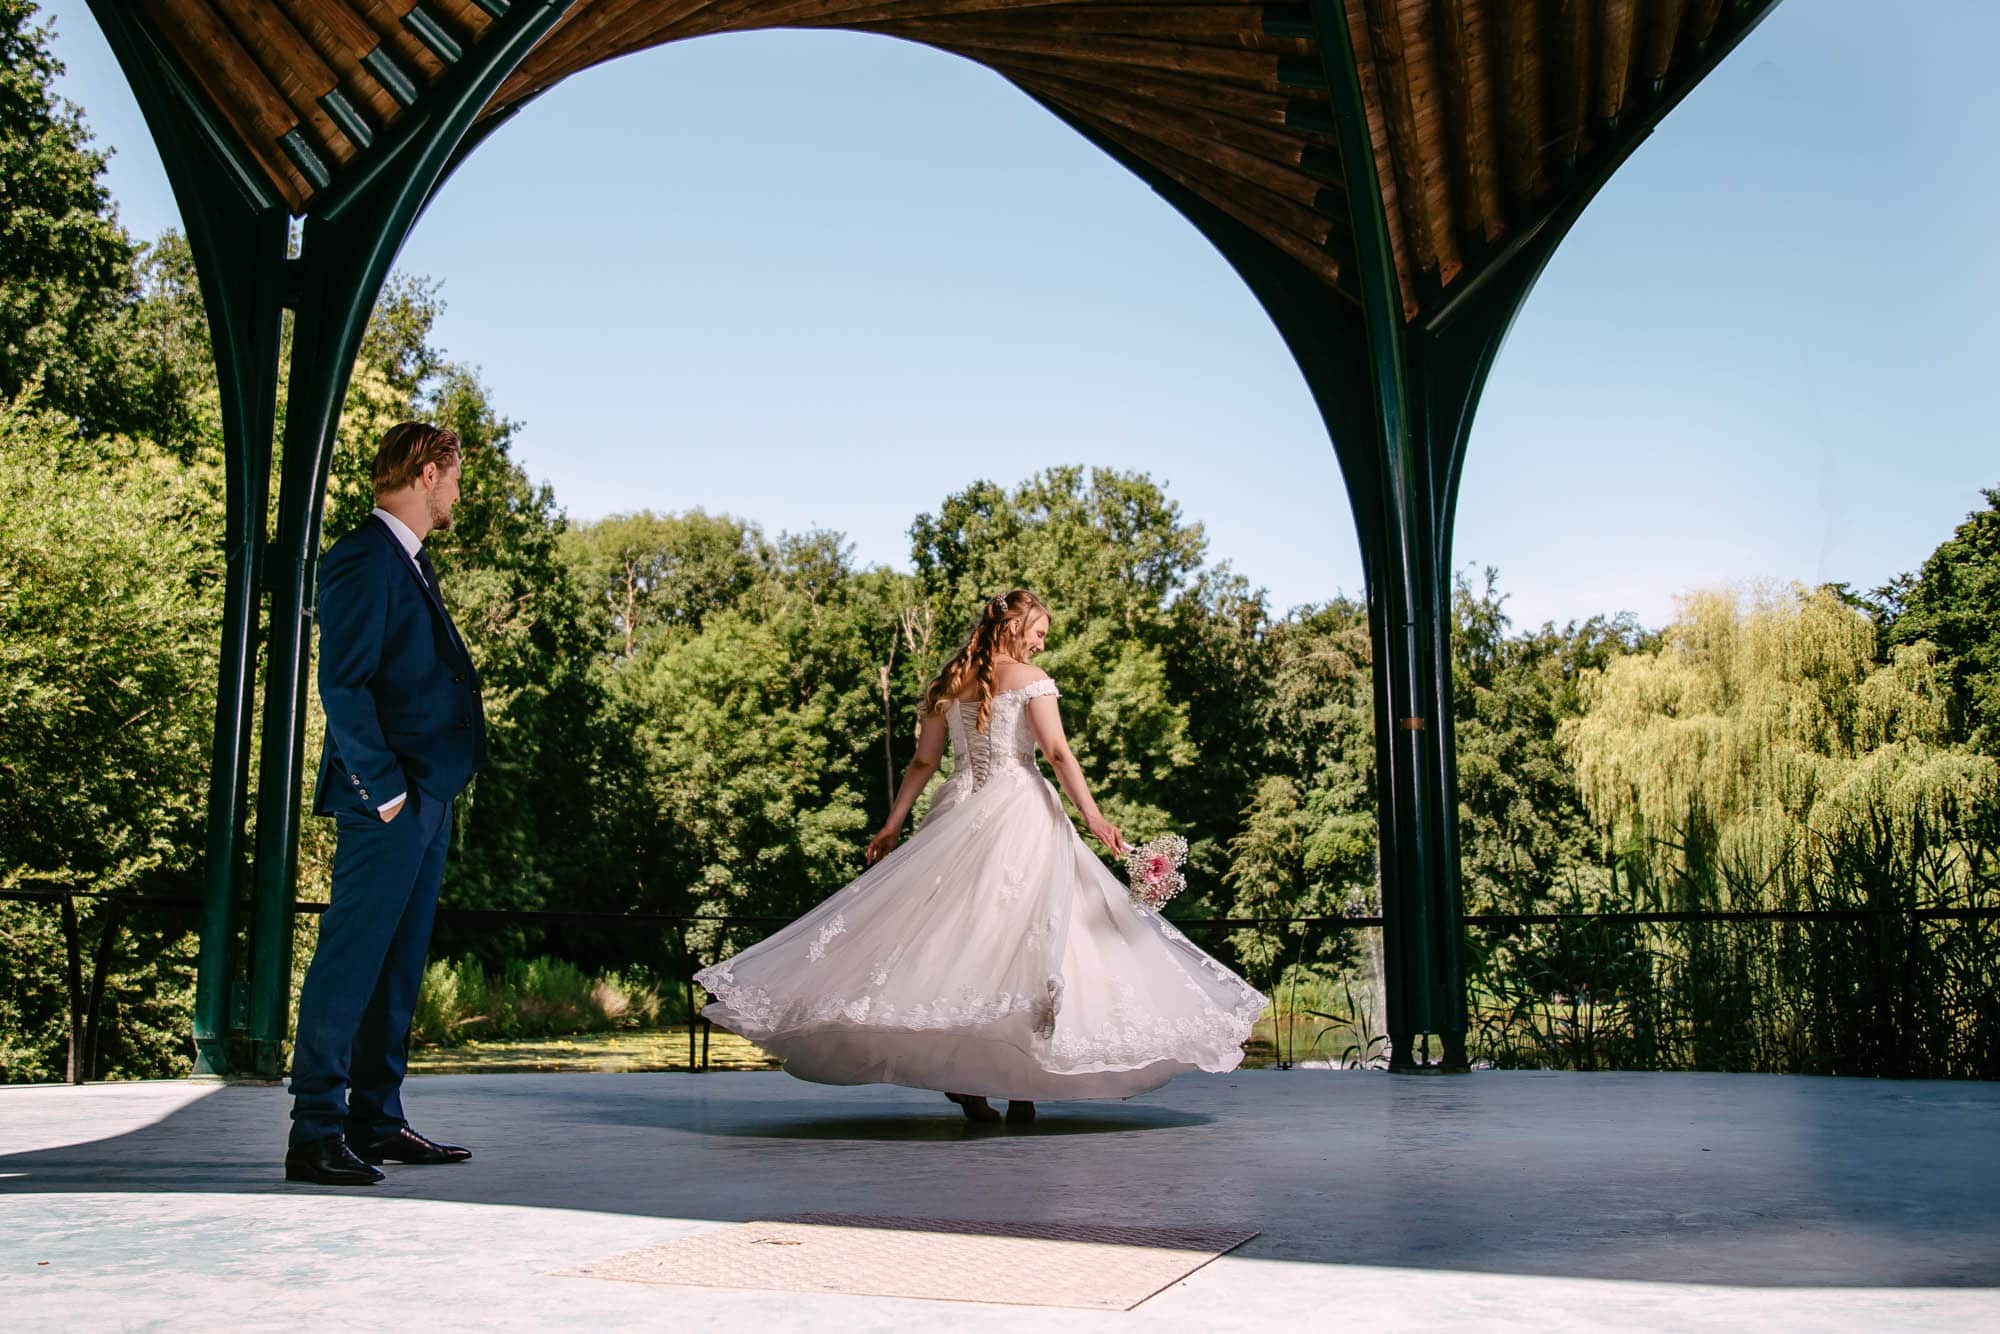 A bride standing under a gazebo in a park, dressed in a beautiful A-line wedding dress, with the groom by her side.